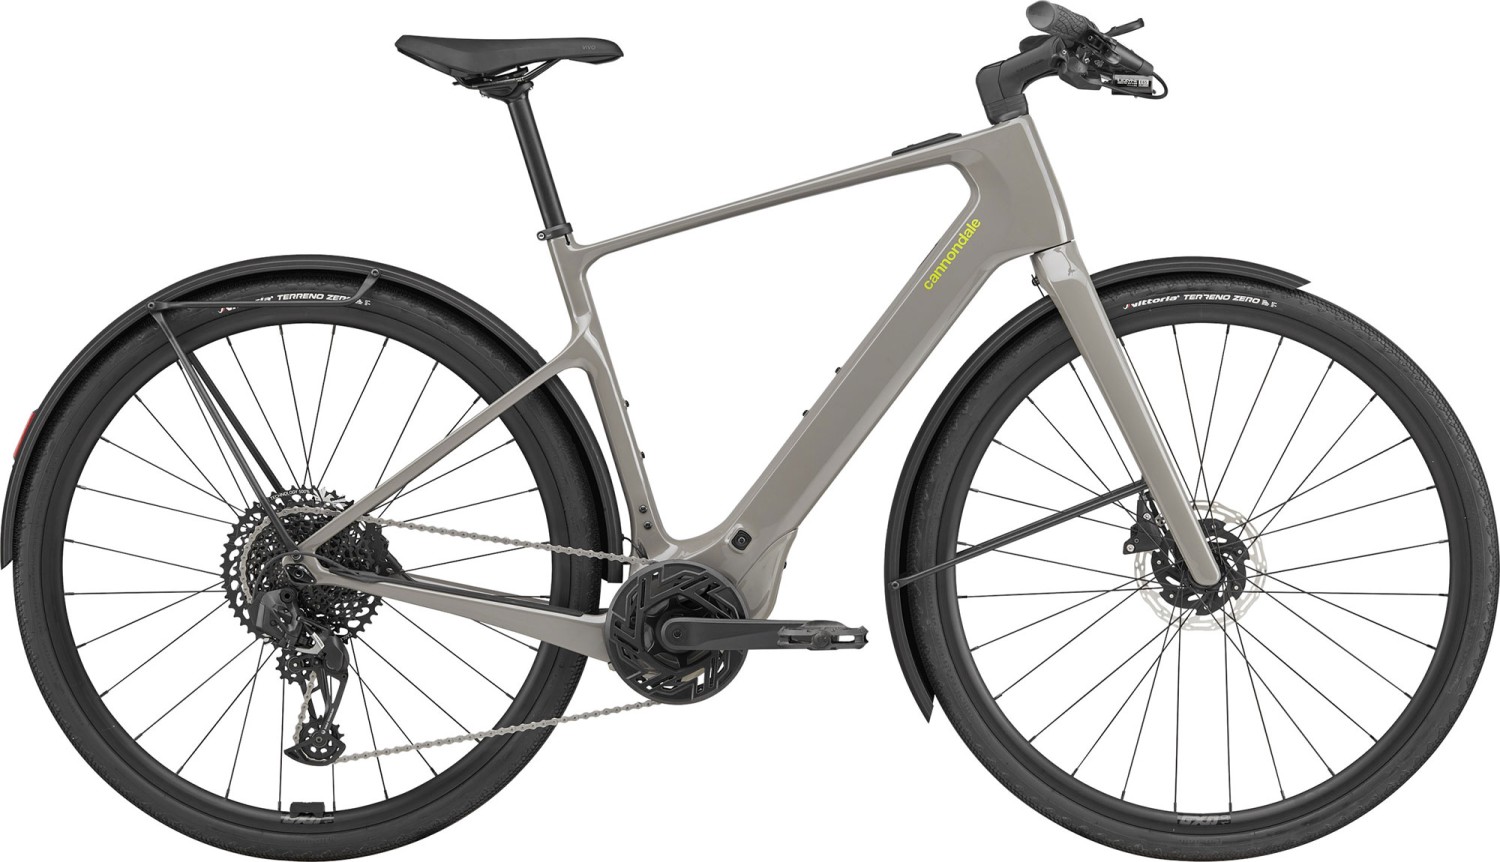 CANNONDALE TESORO NEO CARBON 1 - XS SGY